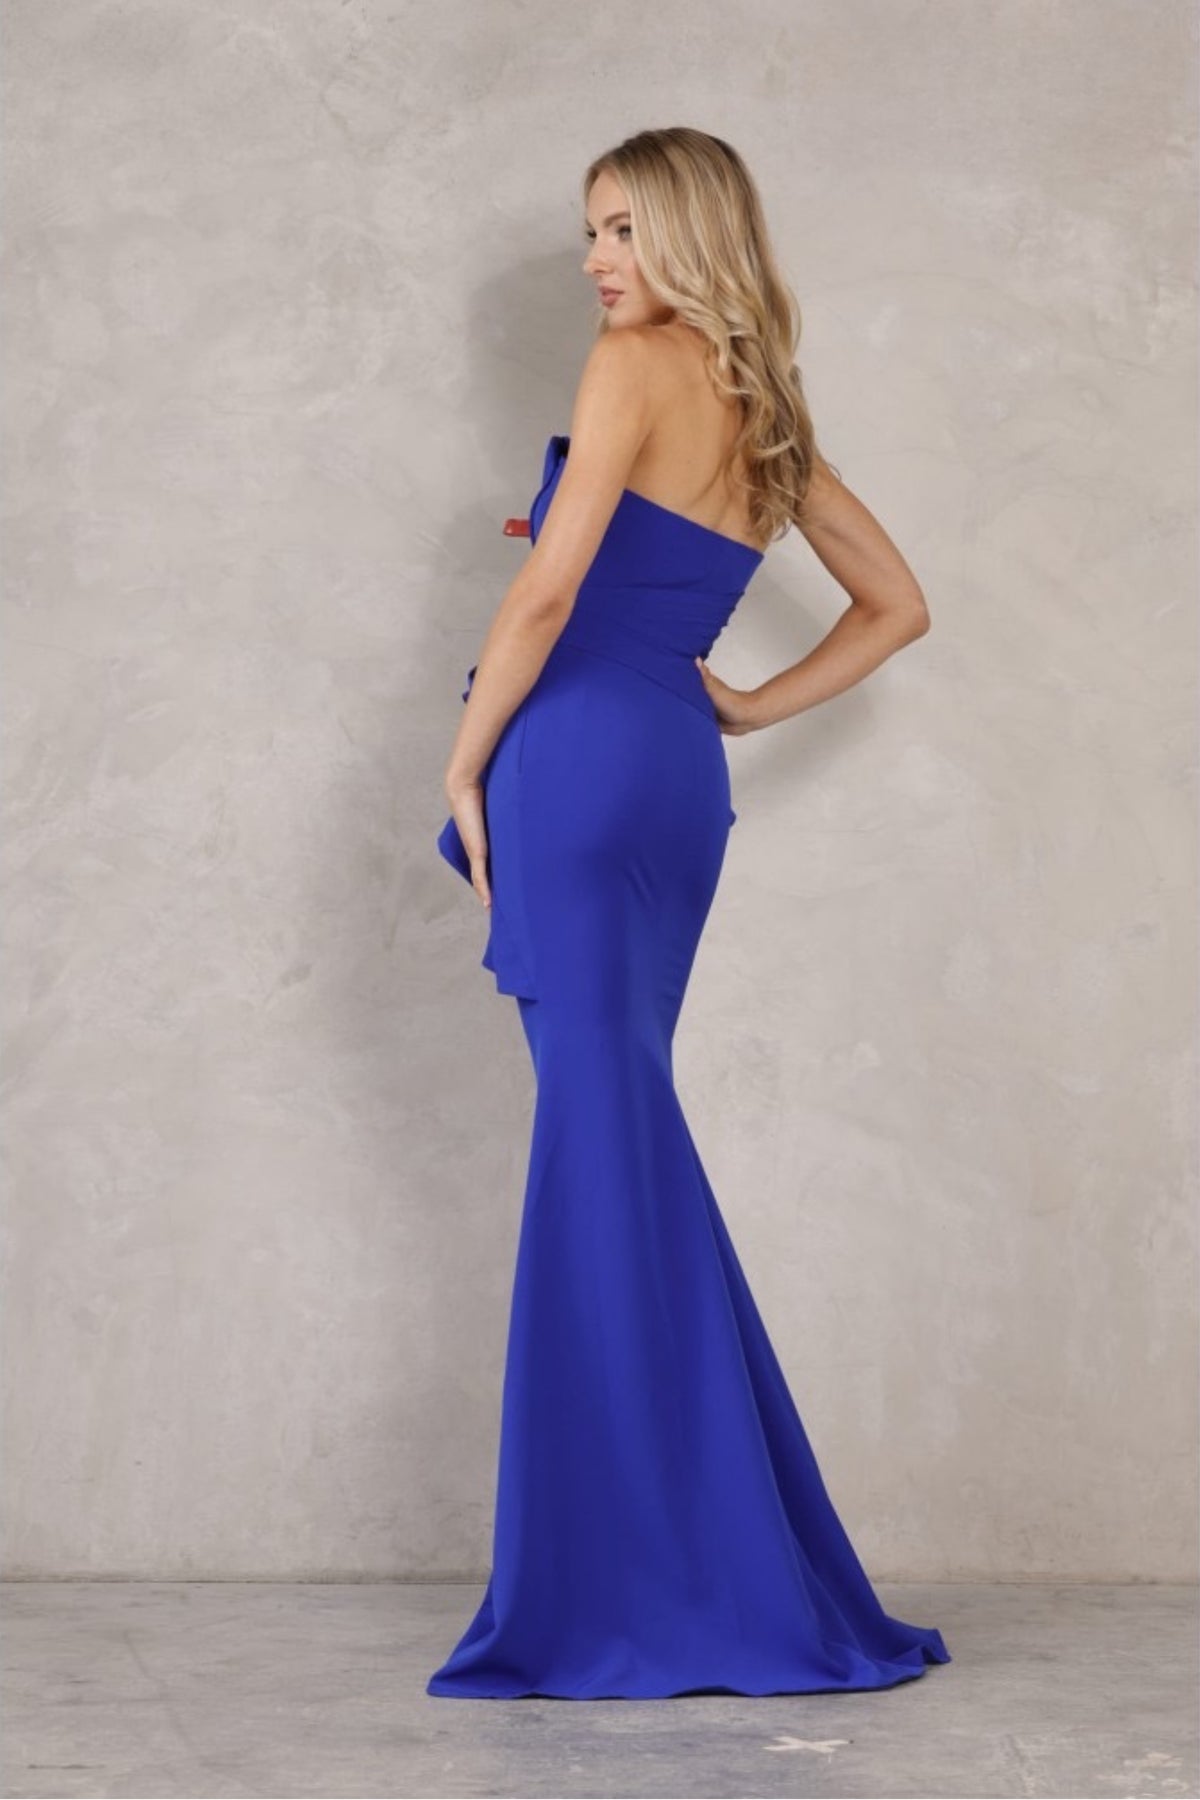 Terani 2214E0165 Strapless Peplum Evening Dress, elegant gown in 2-way stretch satin, perfect for evening events and mother of the bride occasions.